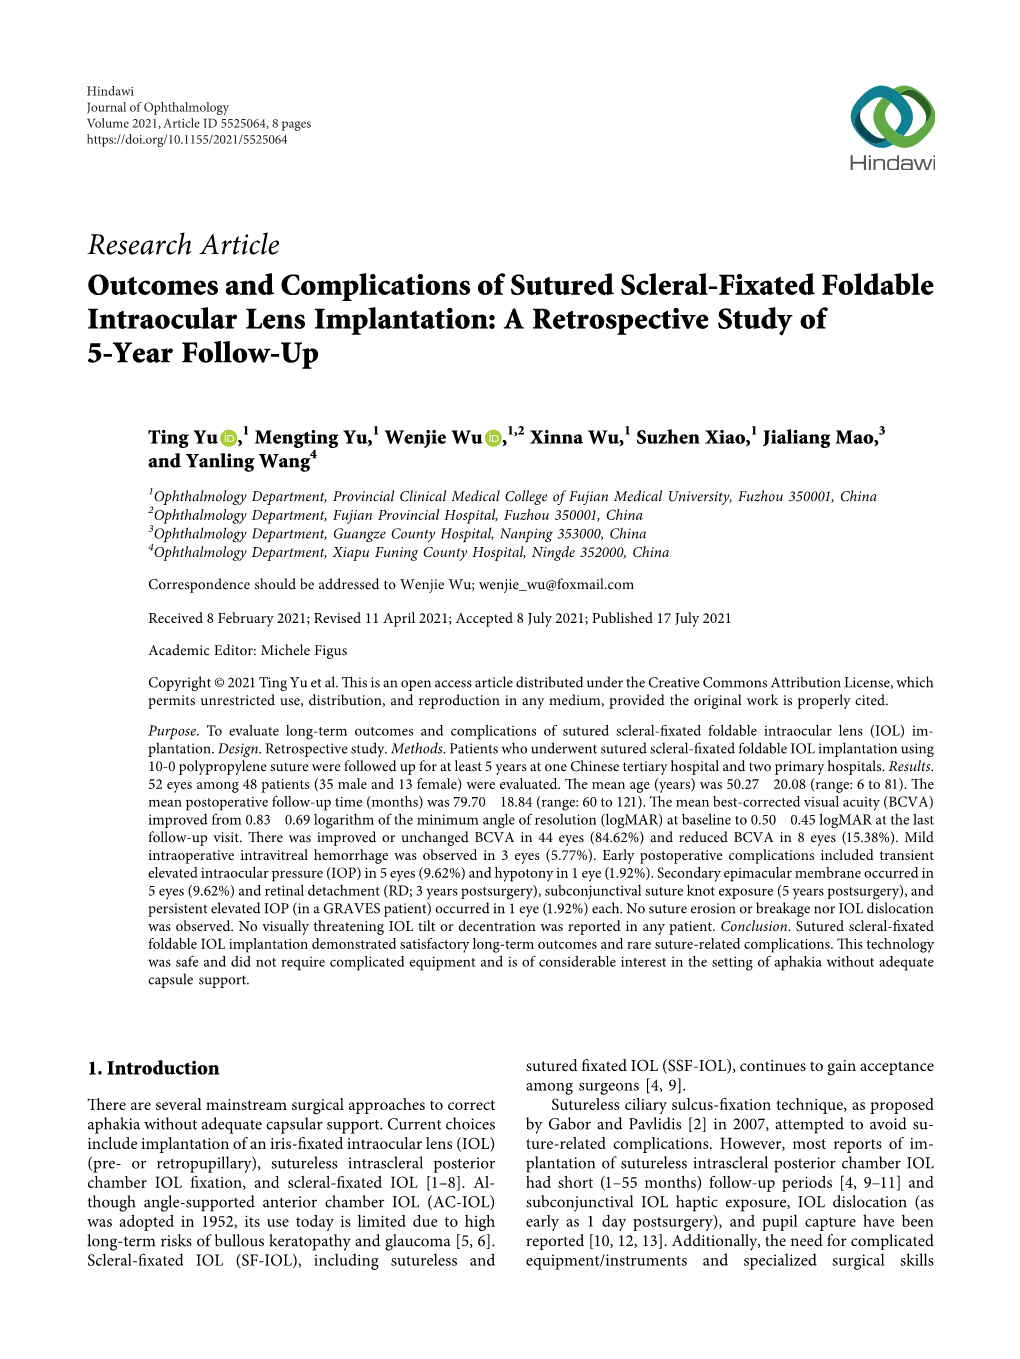 Outcomes and Complications of Sutured Scleral-Fixated Foldable Intraocular Lens Implantation: a Retrospective Study of 5-Year Follow-Up